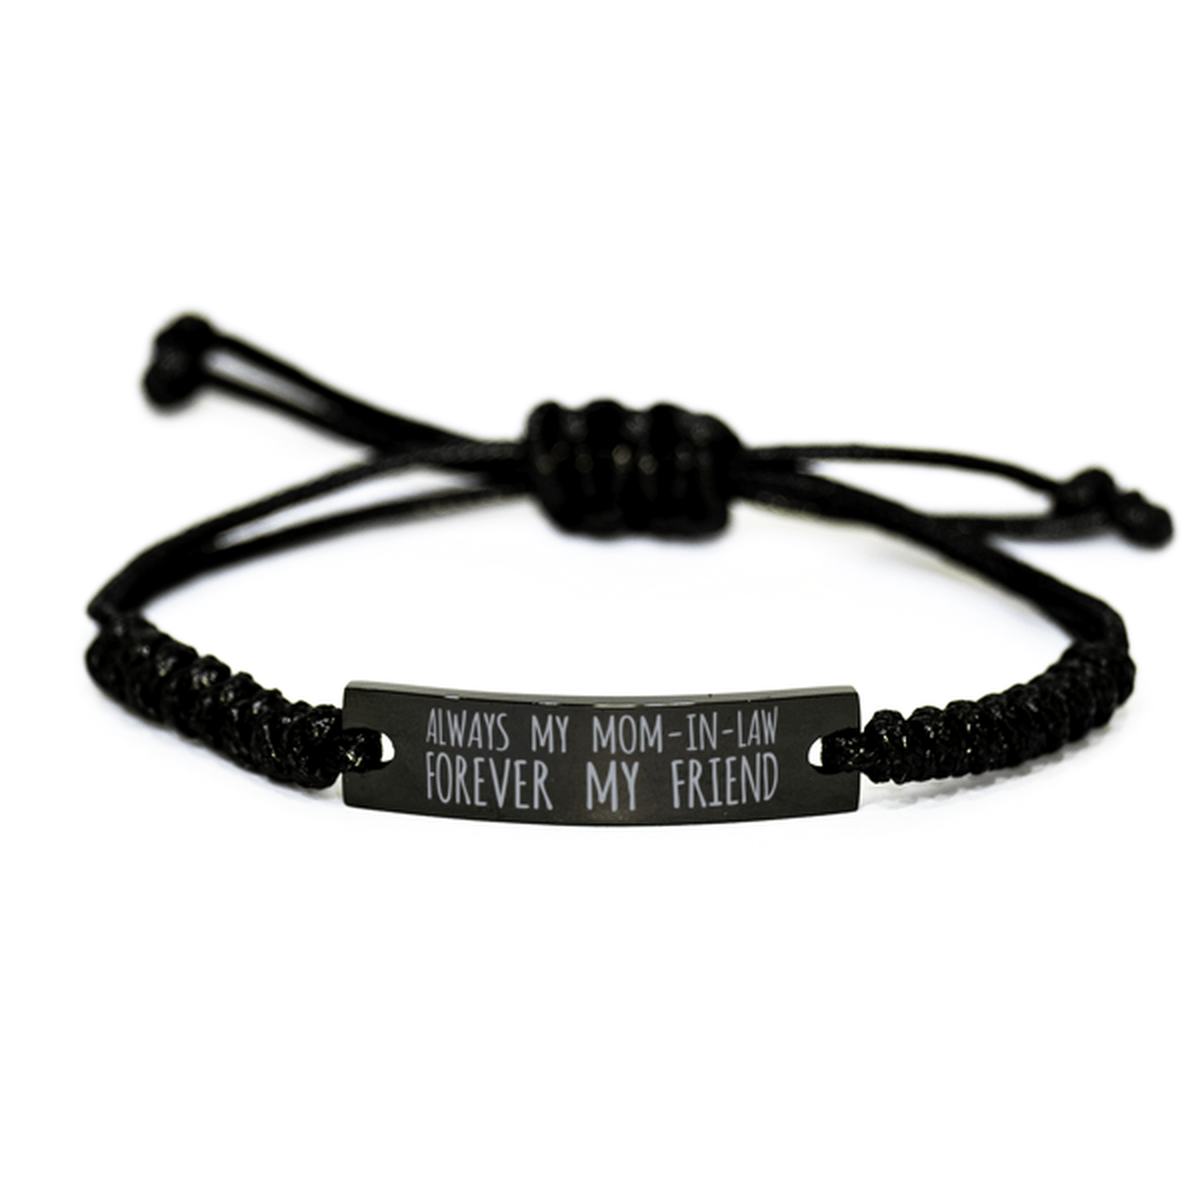 Inspirational Mom-In-Law Black Rope Bracelet, Always My Mom-In-Law Forever My Friend, Best Birthday Gifts For Family